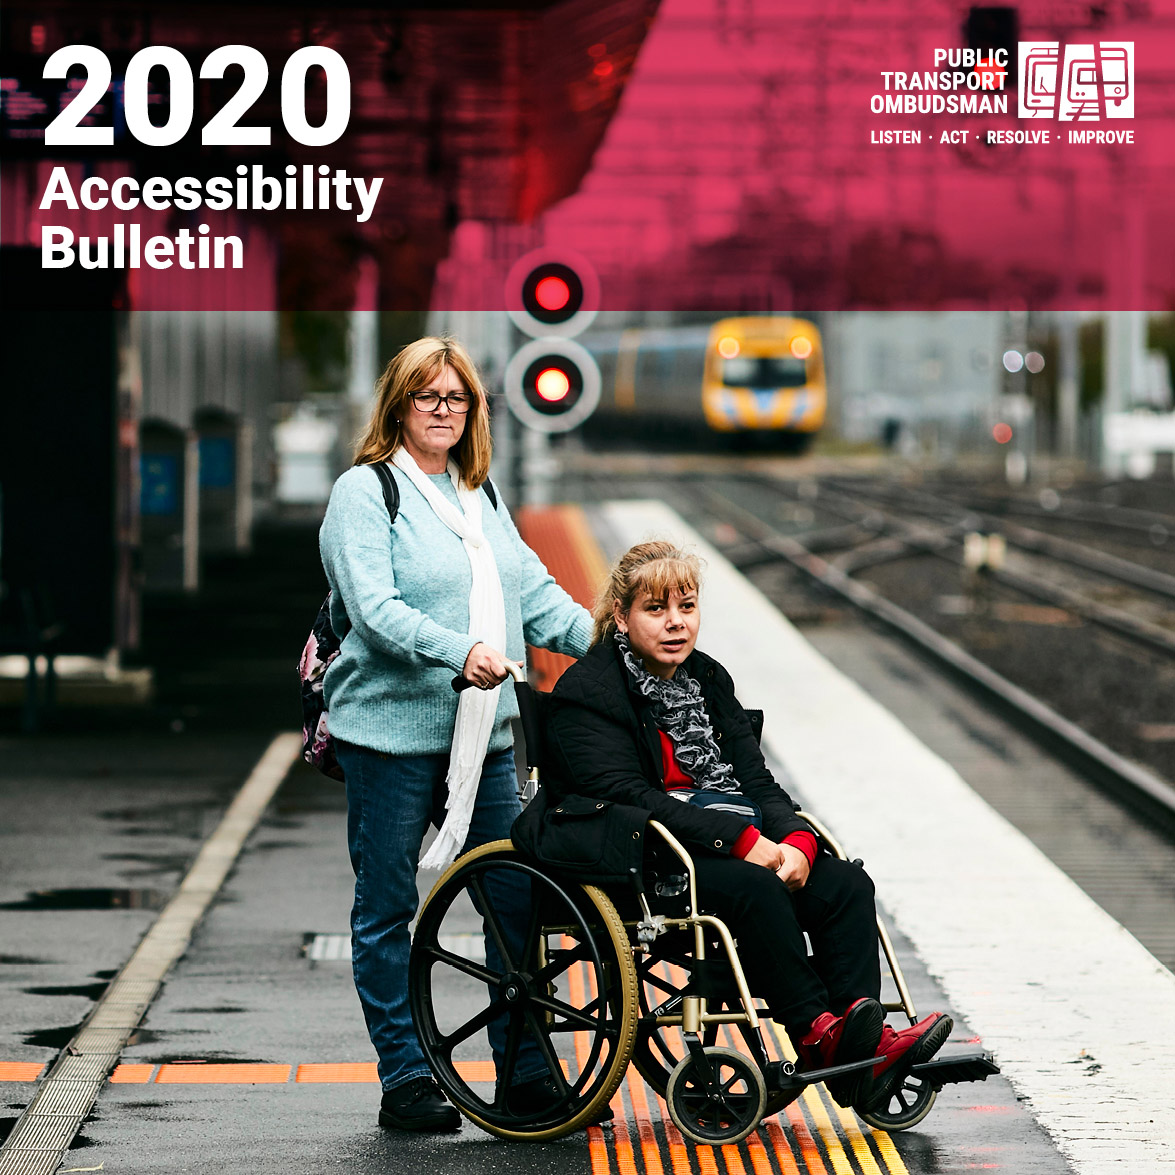 2020 Accessibility Bulletin Cover shows a person in a wheelchair waiting on a station platform with her carer as a train approaches in the background.